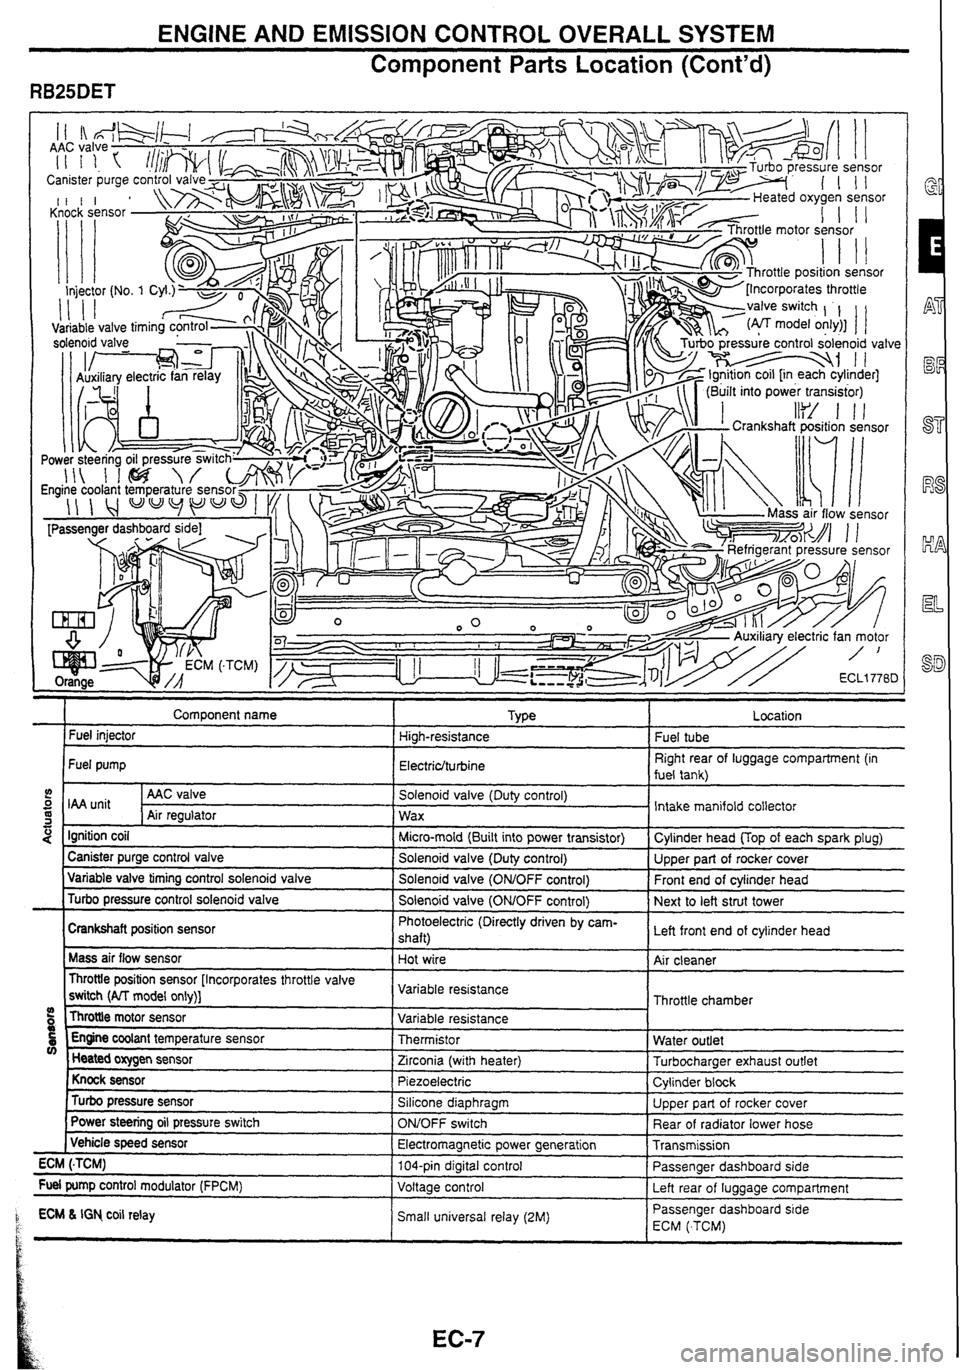 NISSAN GT-R 1998  Service Manual 
ENGINE AND EMISSION CONTROL OVERALL SYSTEM 
Component 
Parts Location  (Contd) 
" . . ., . .7 
Comoonent  name I TVLE a r Fuel injector  High-resistance 
Fuel  pump 
Electriclturbine 
5 I unit I AAC